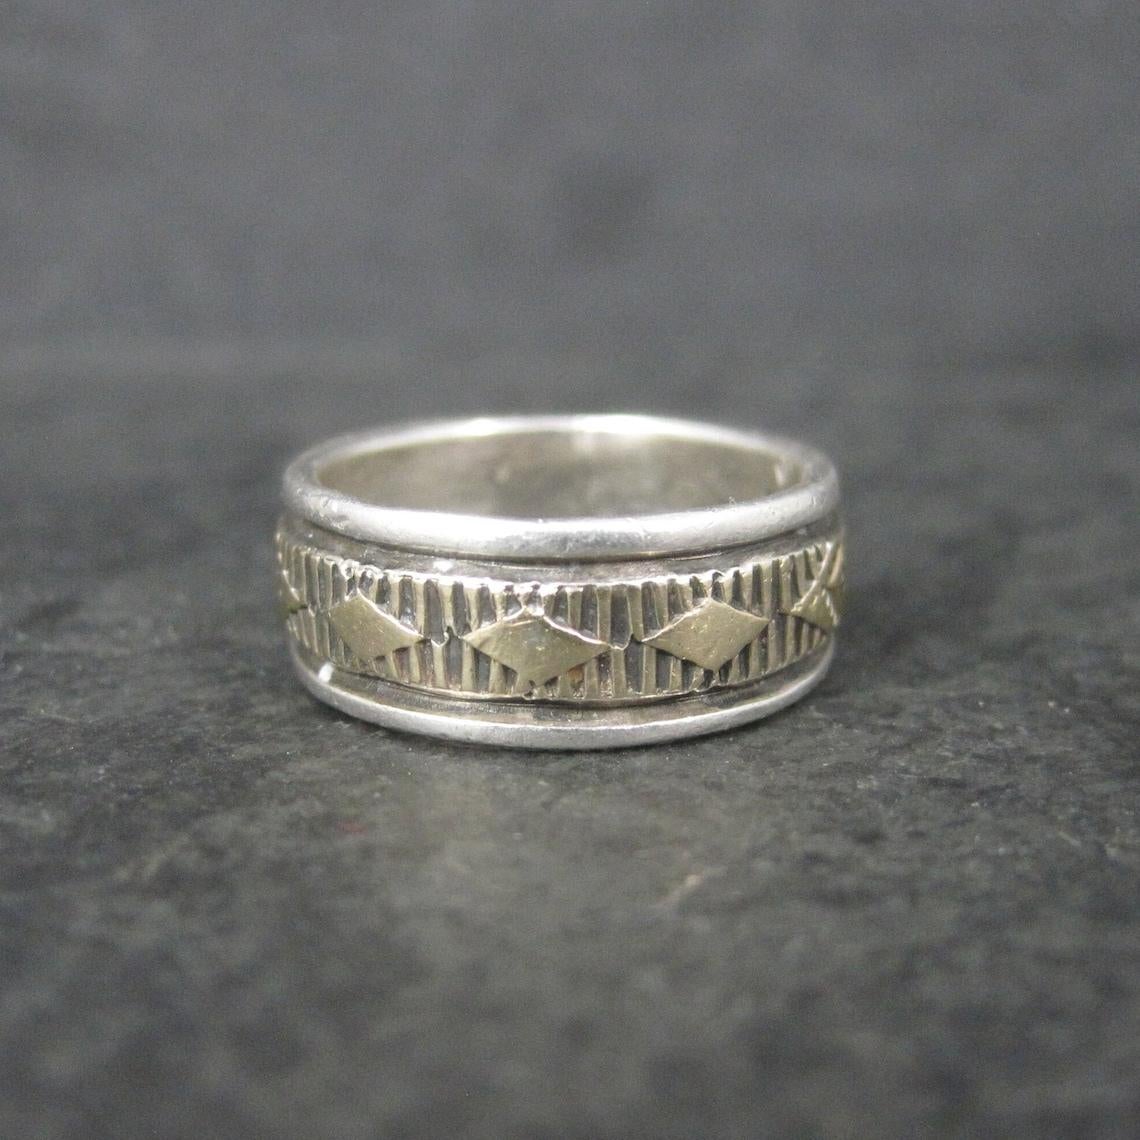 This gorgeous, vintage band ring is a combination of sterling silver and 14k yellow gold.
It is a creation of Navajo silversmith Bruce Morgan.

Measurements: 7.5mm wide
Size: 6.75 but fits more like a 6.5 due to its width.

Marks: B. Morgan,